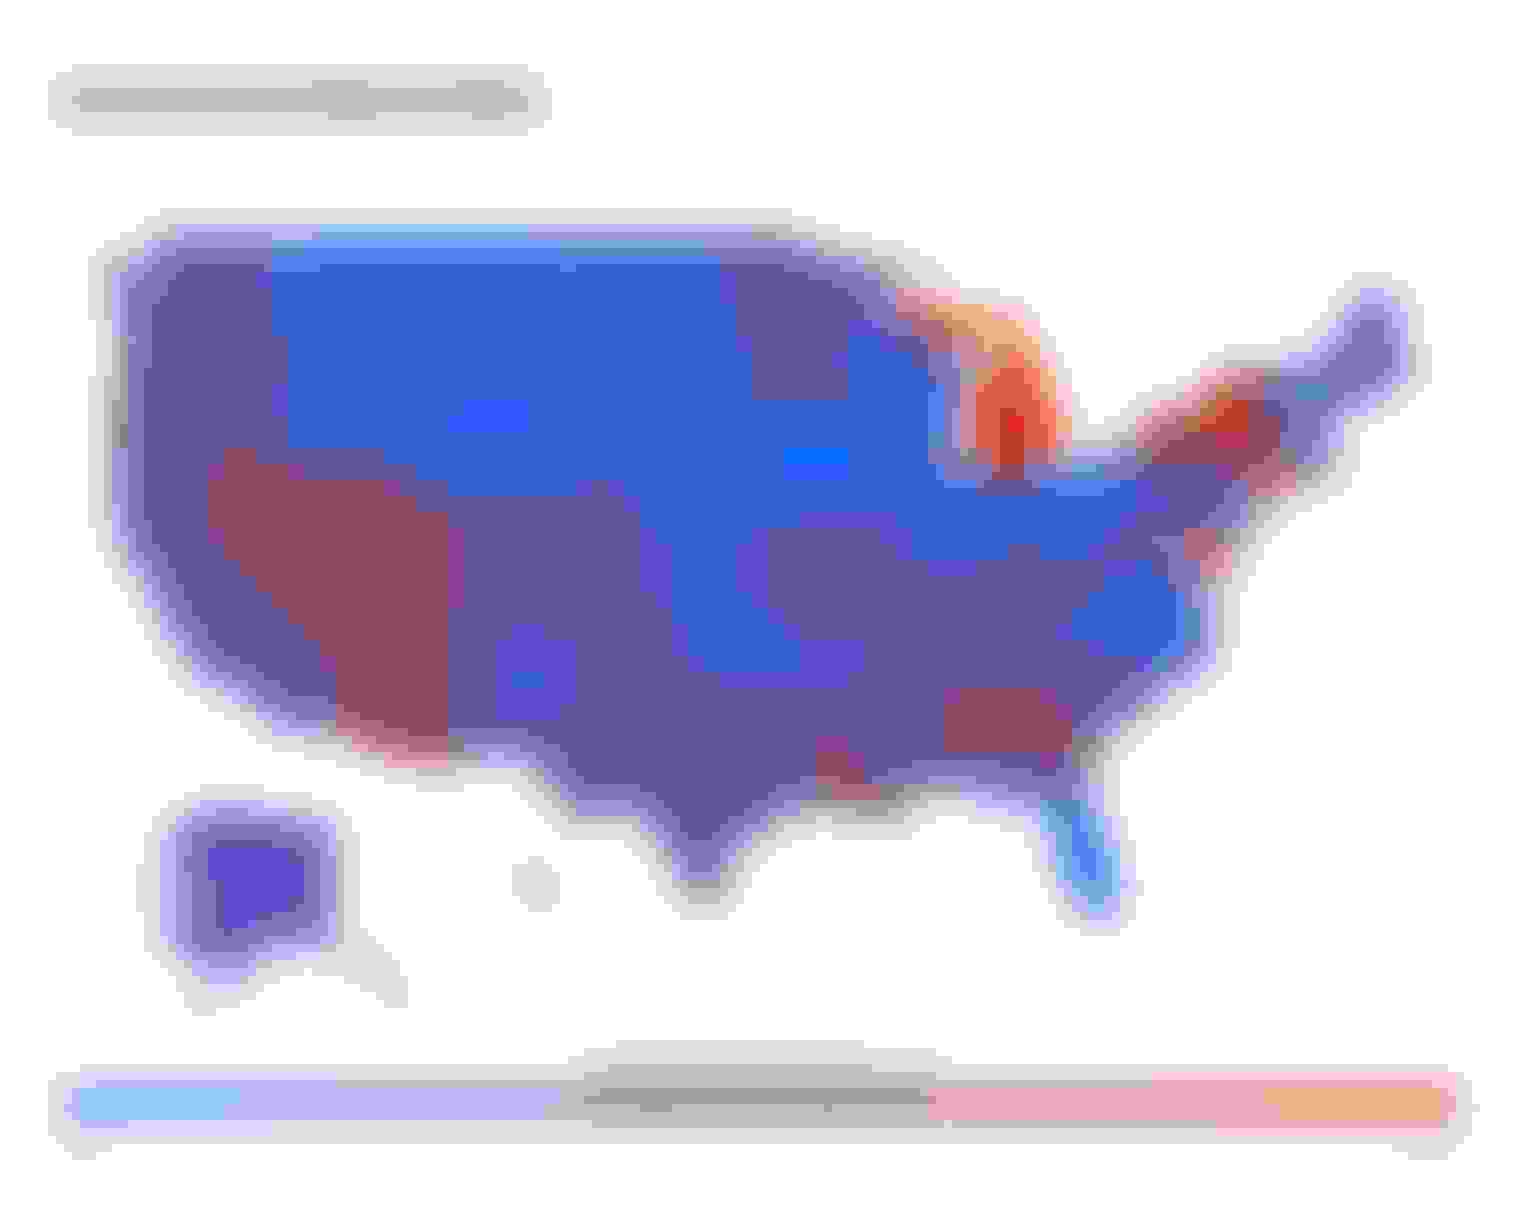 Heatmap of U.S. auto insurance rates by state